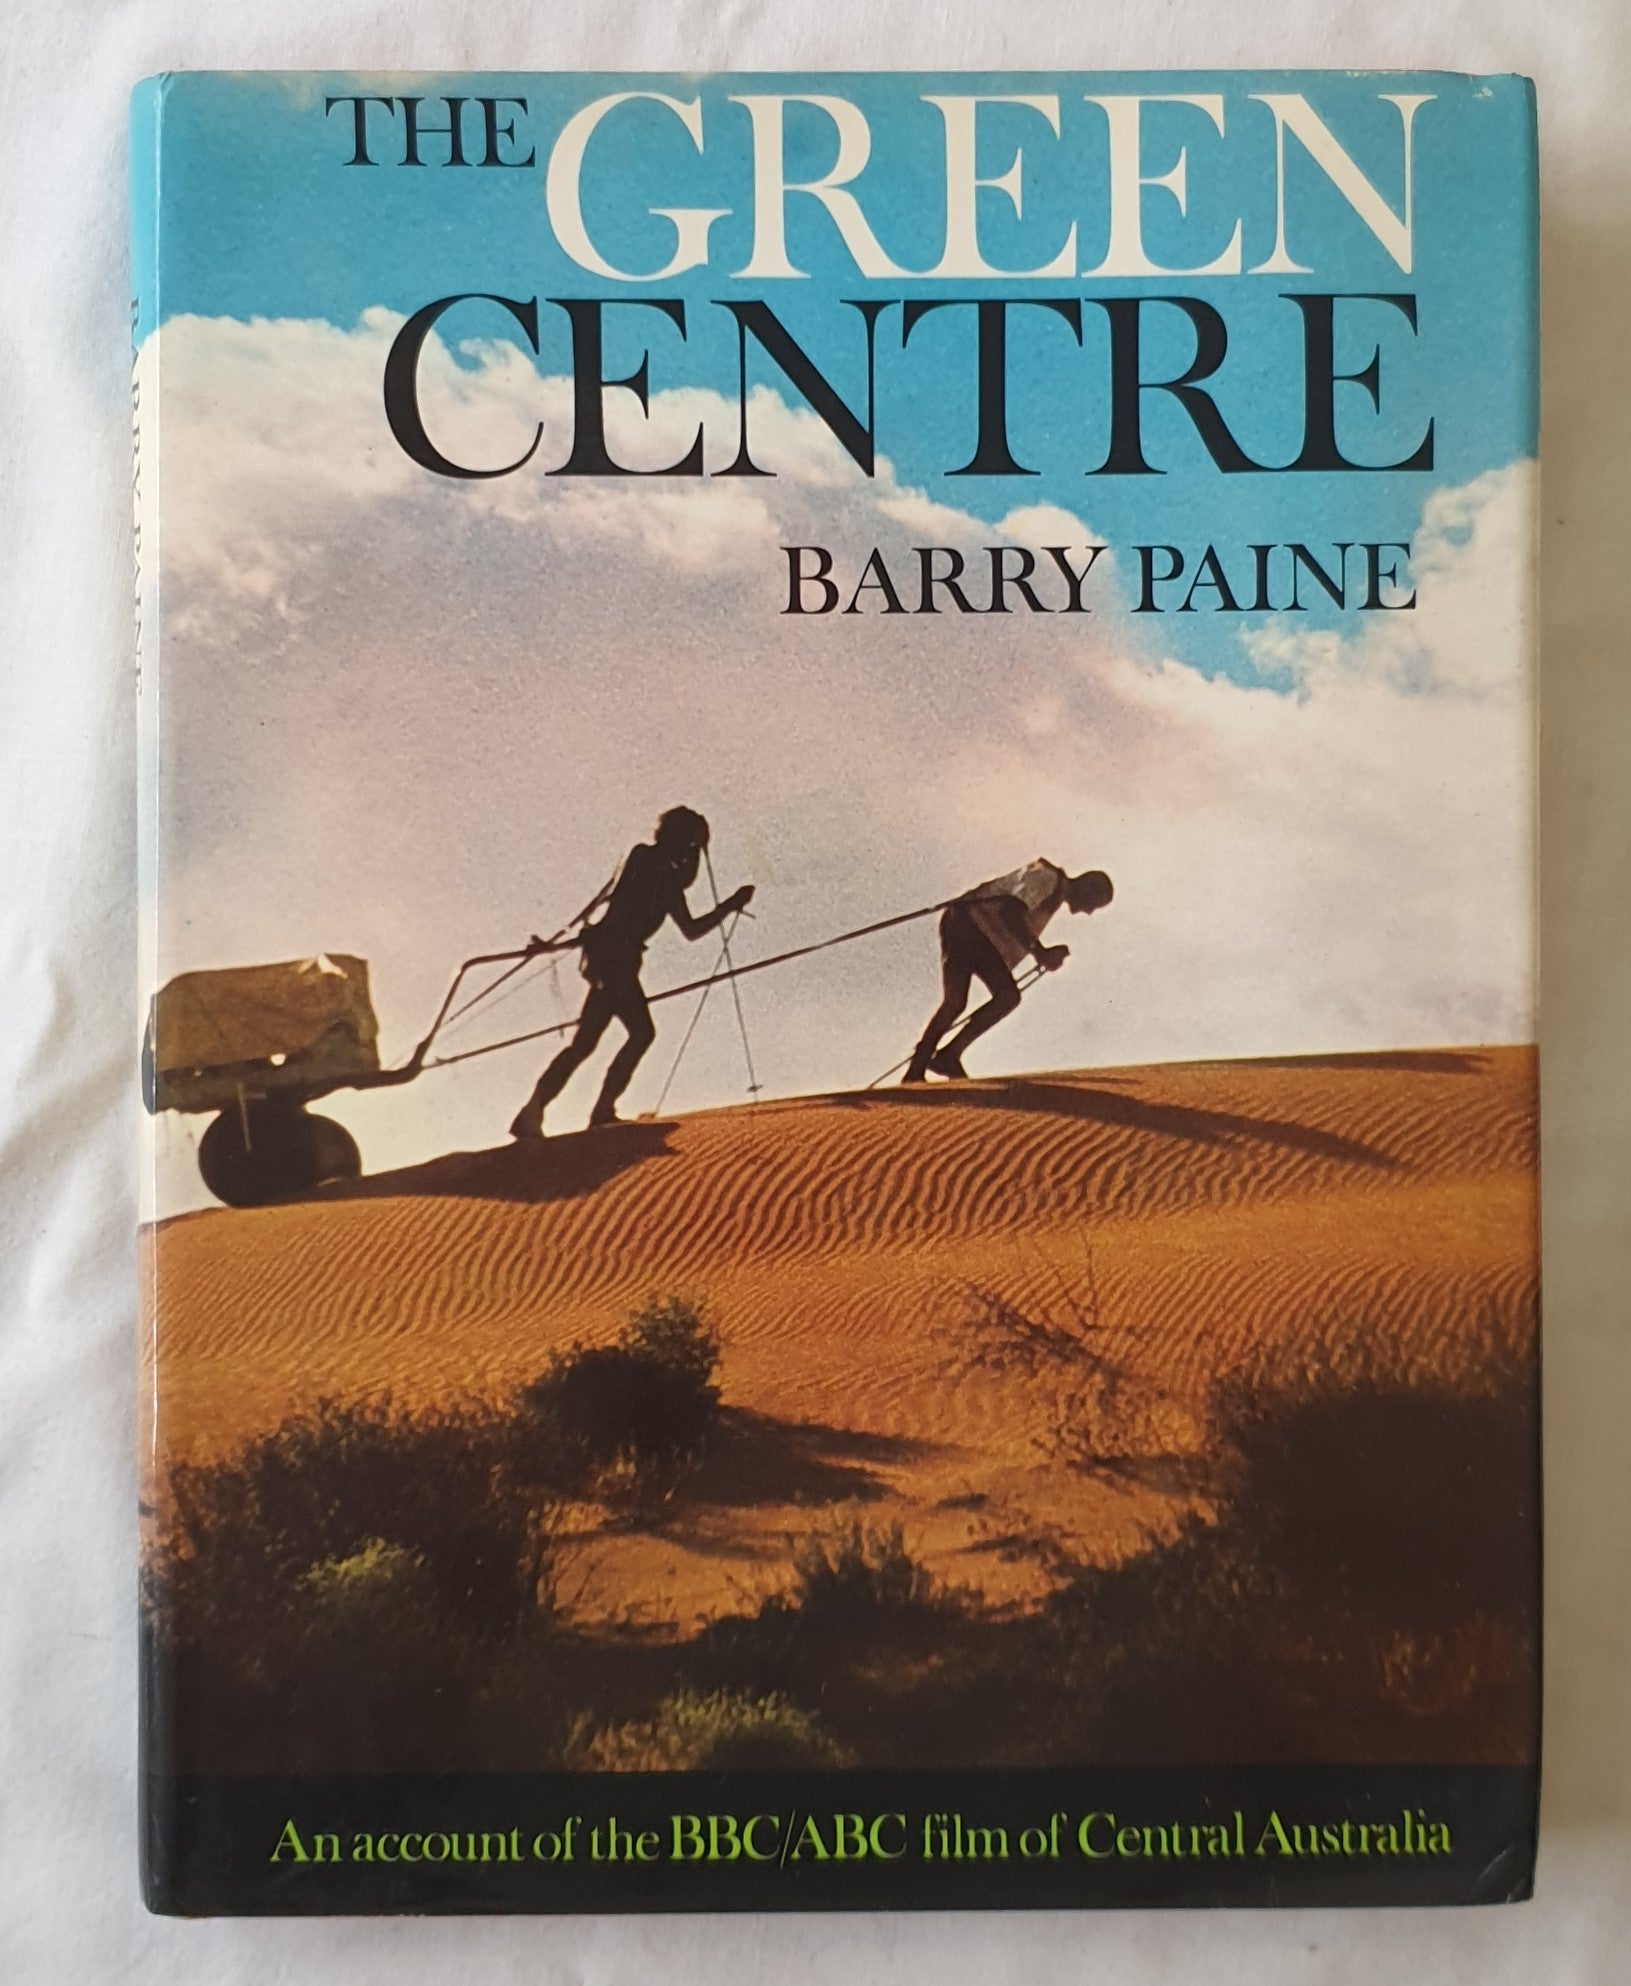 The Green Centre by Barry Paine